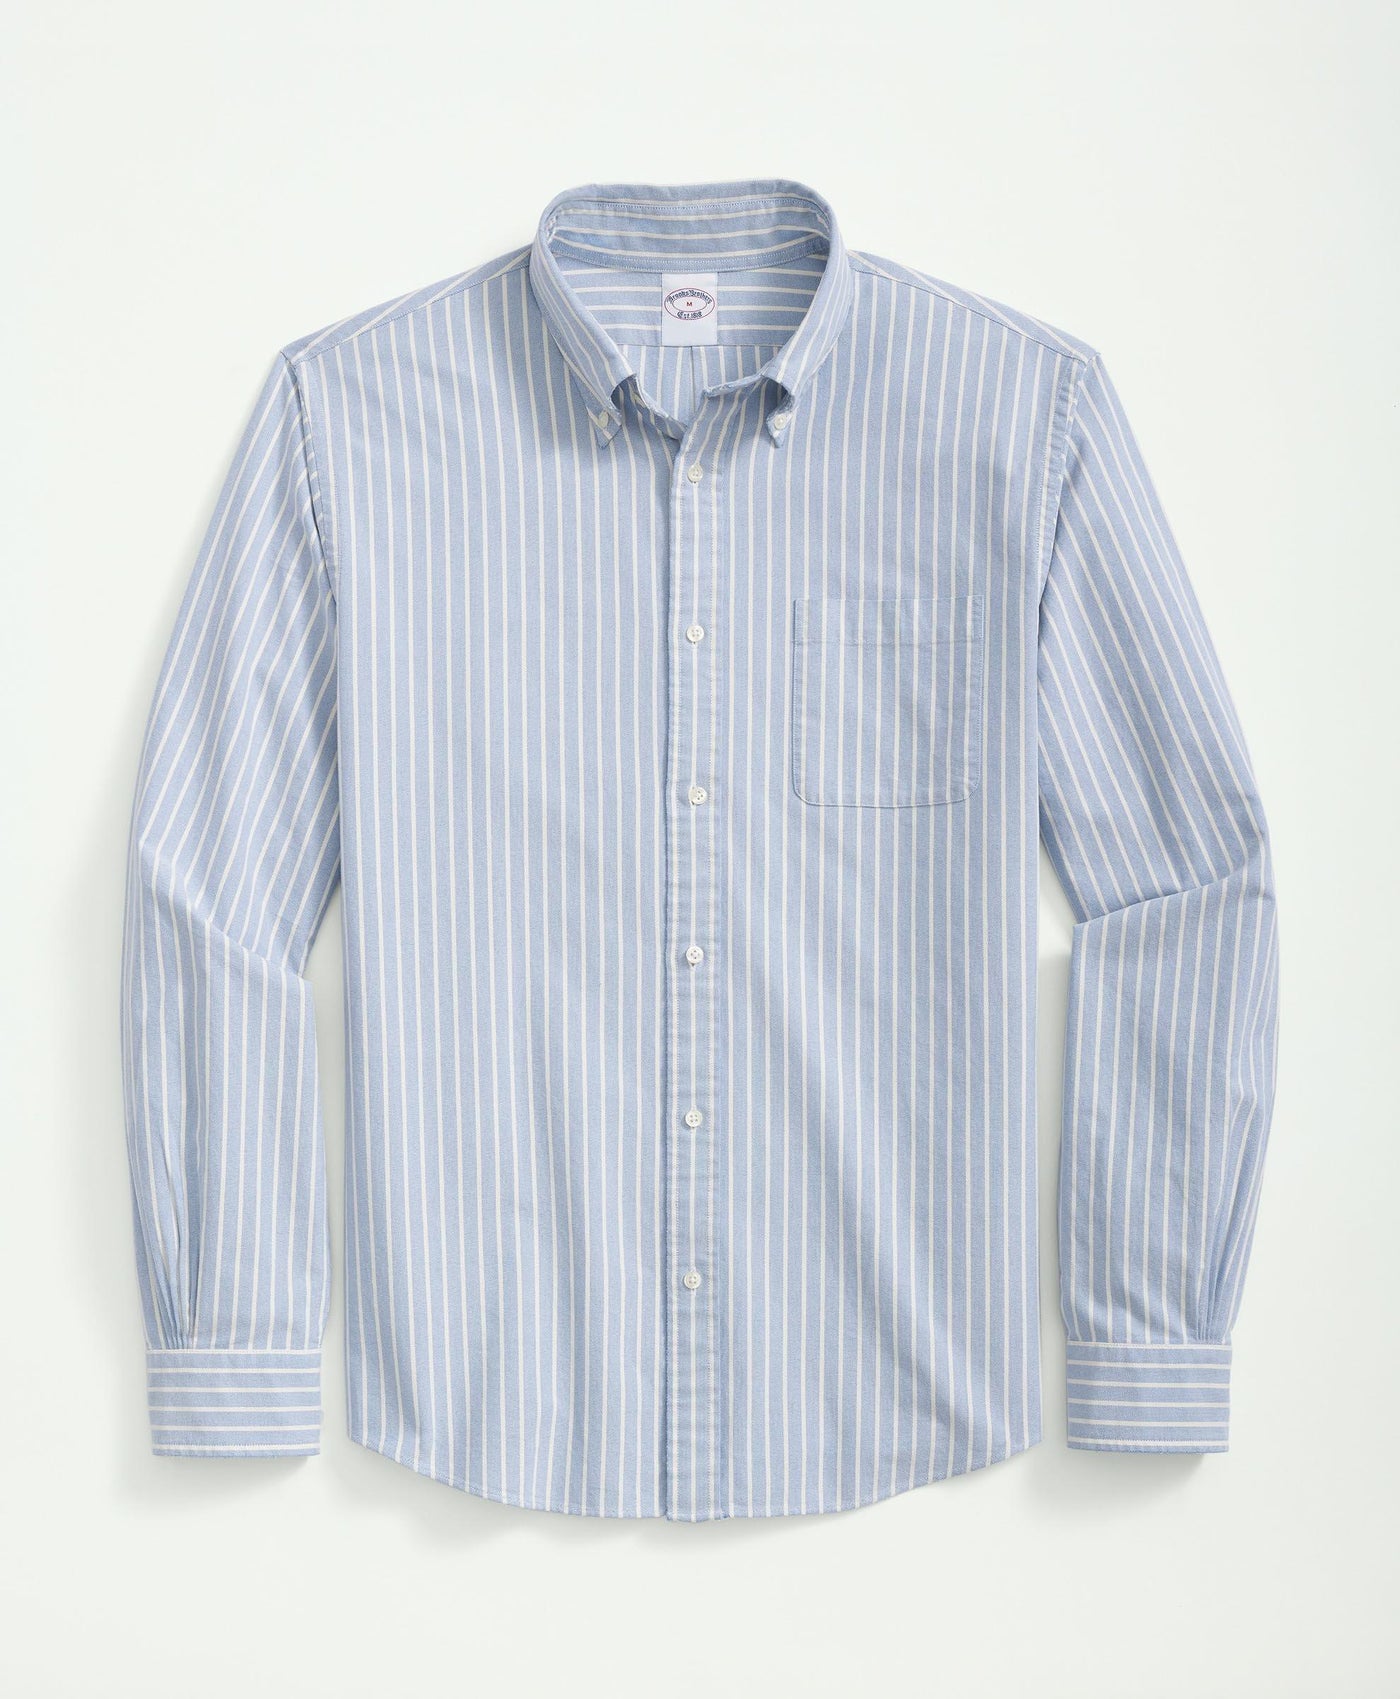 Friday Shirt, Oxford Archive Striped